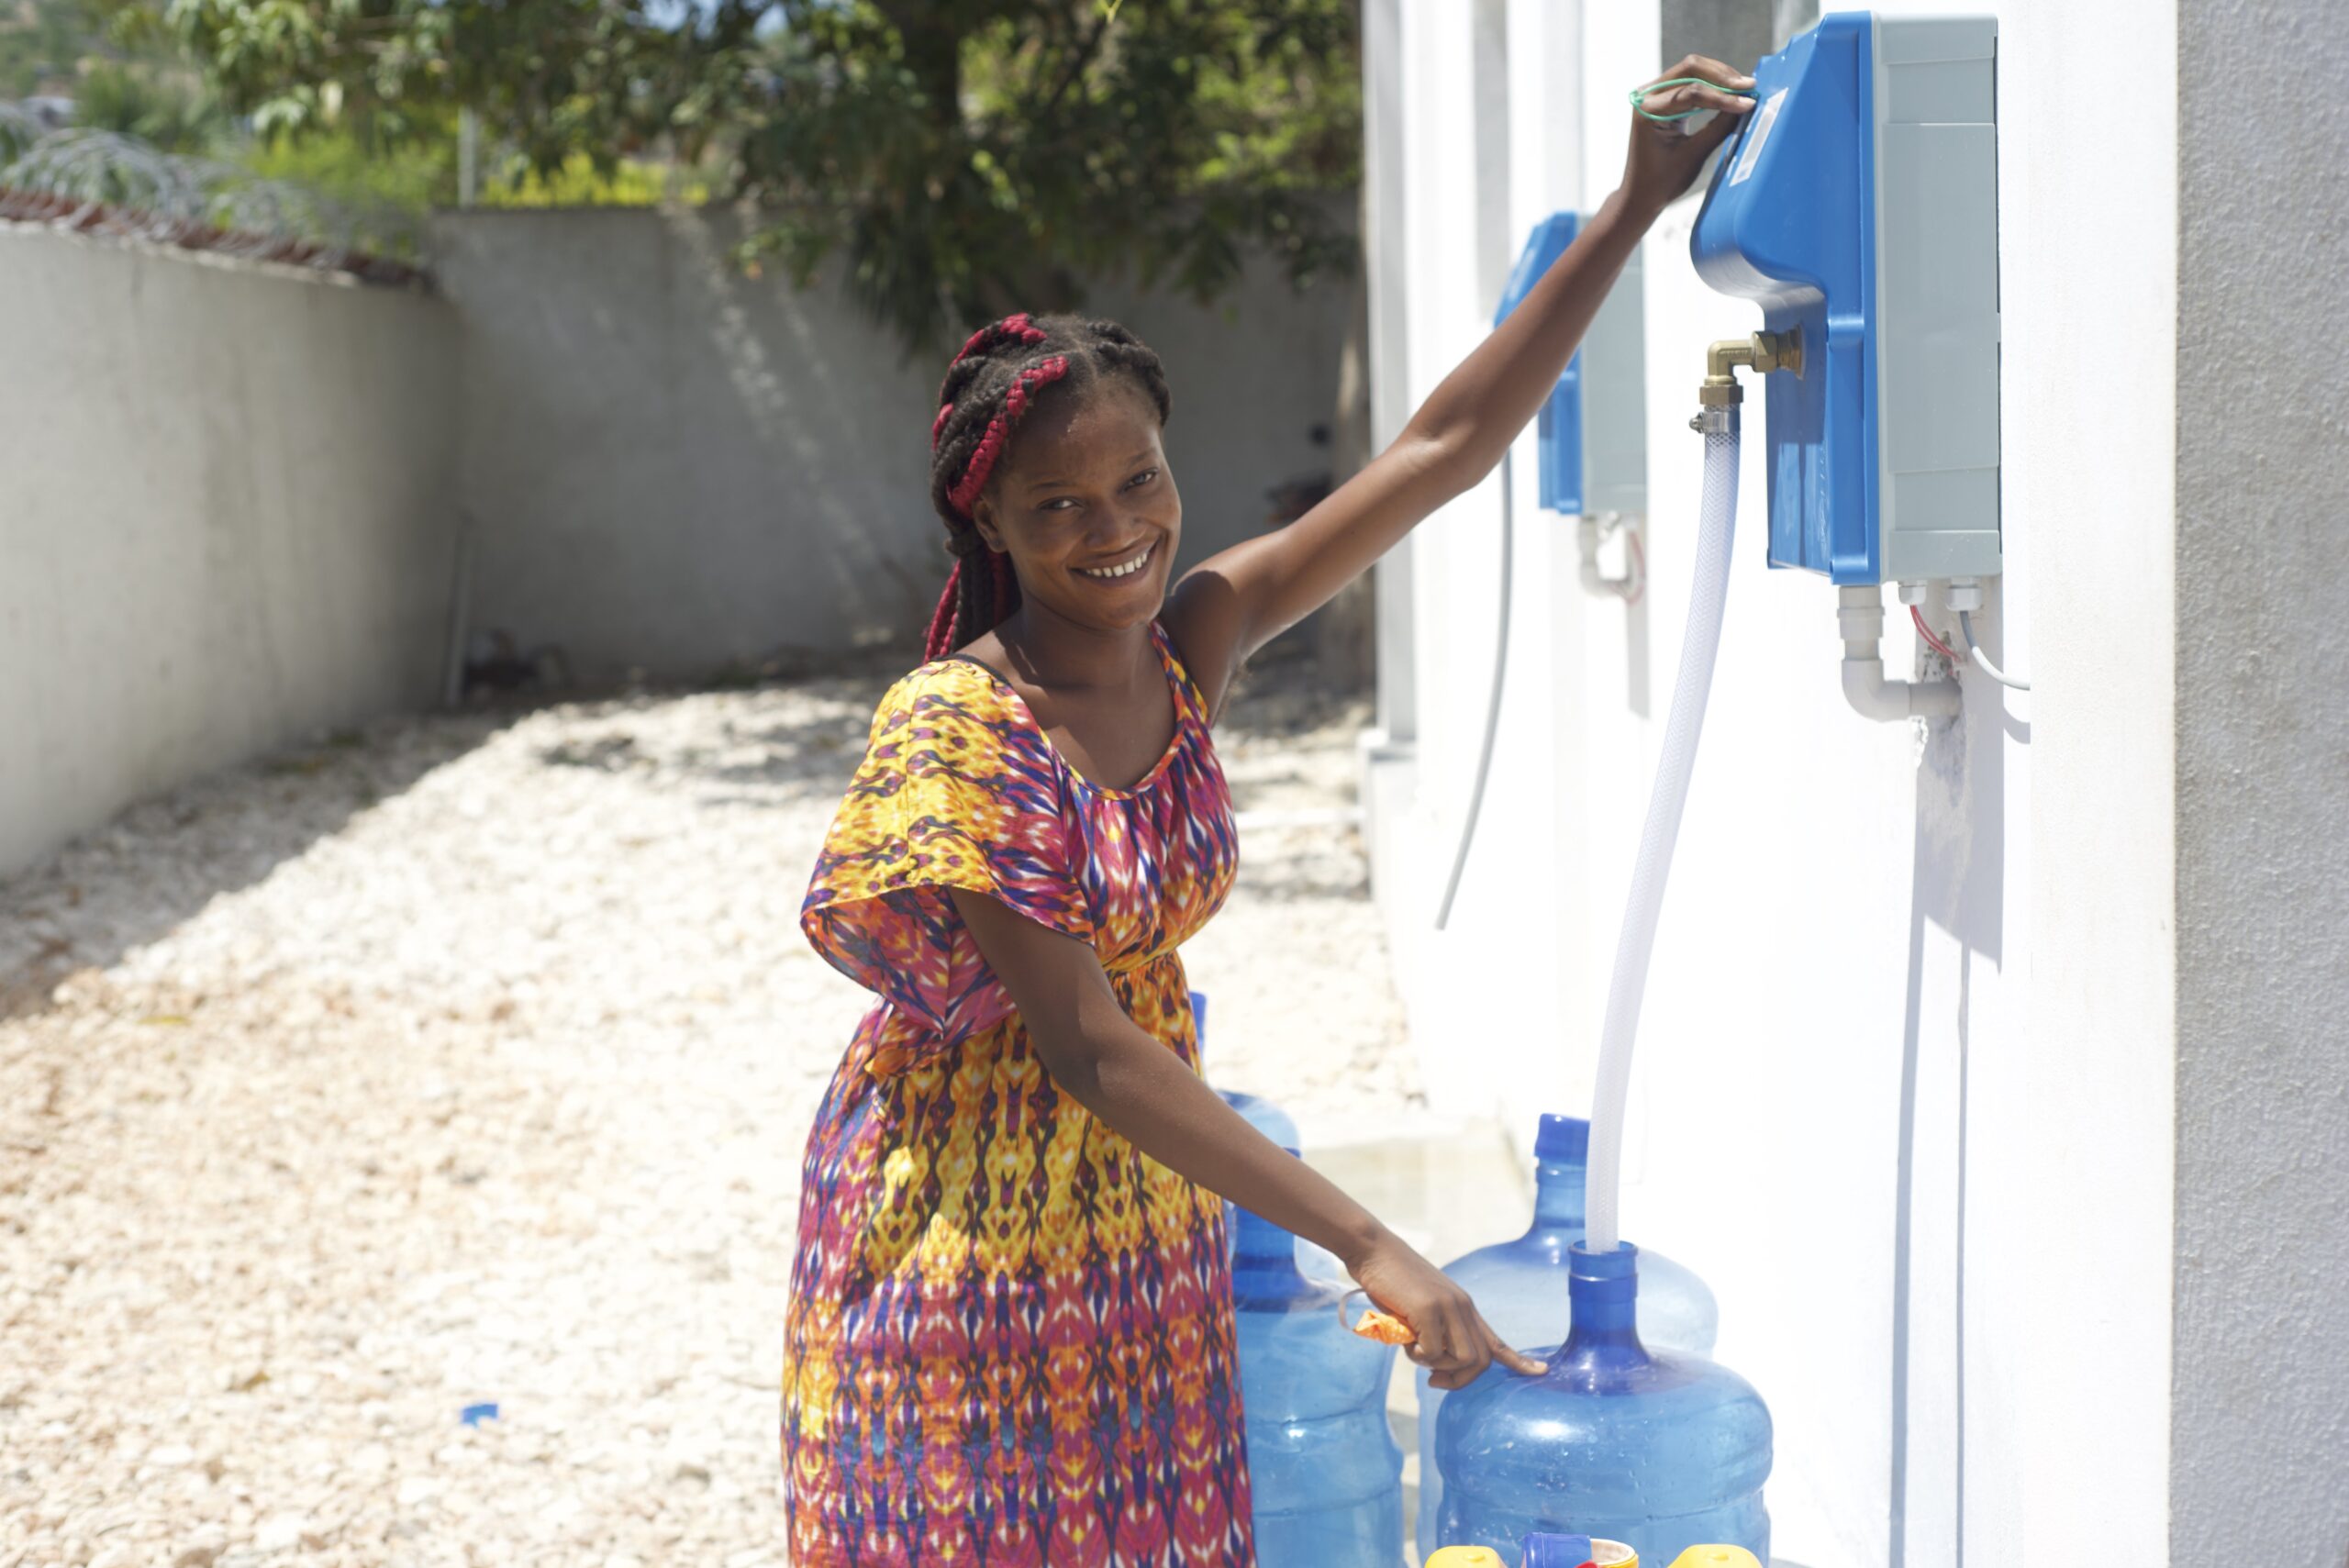 A smiling young girl filling up clean drinking water in 5 gallon bottles.